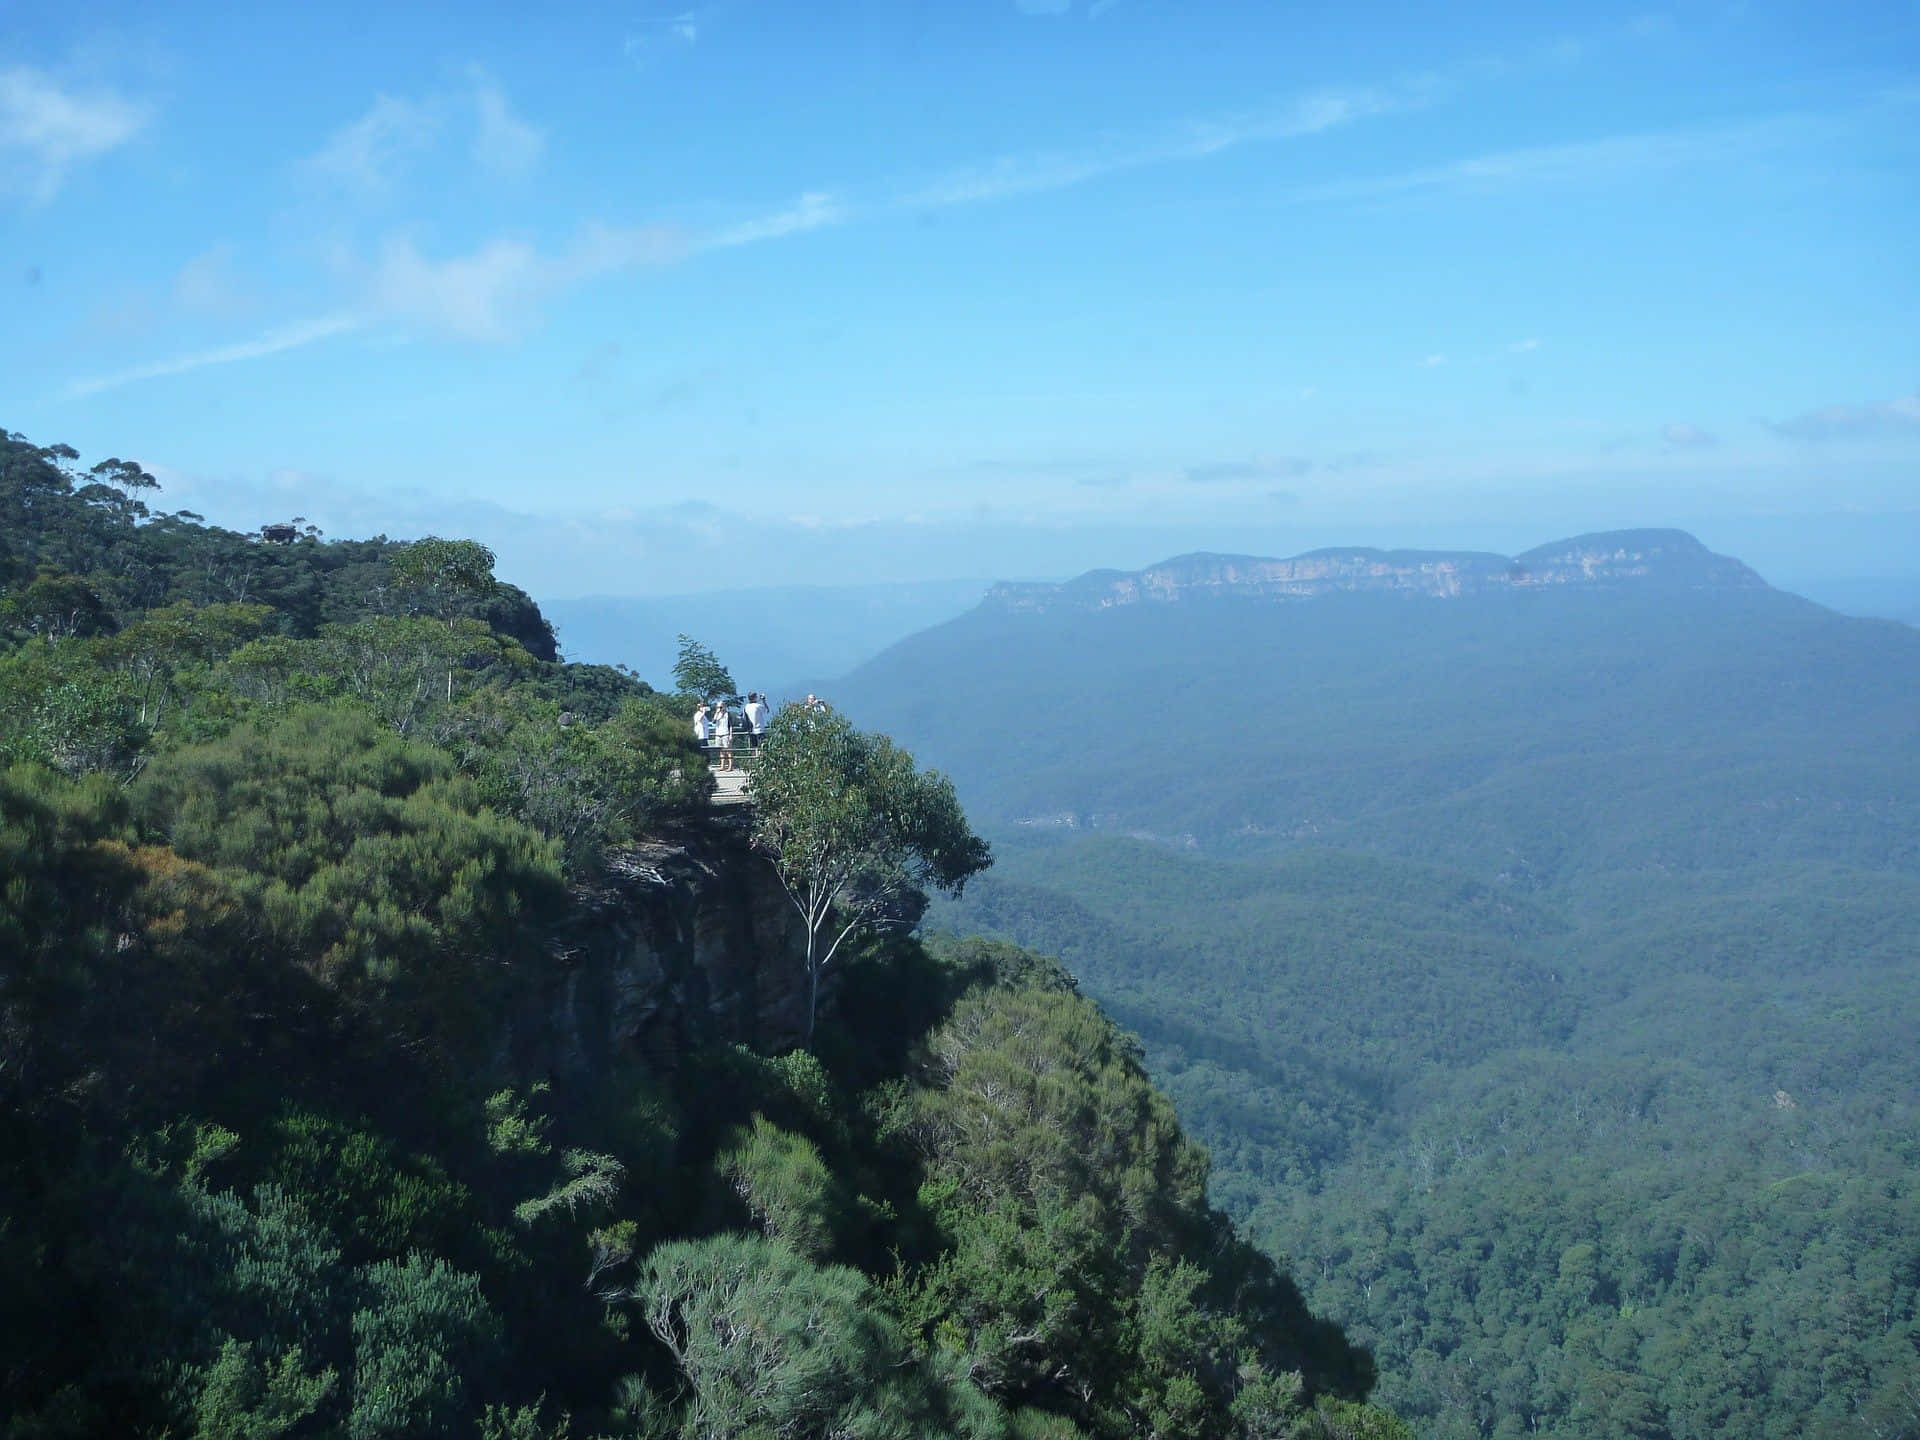 Hiking through the scenic Blue Mountains National Park Wallpaper